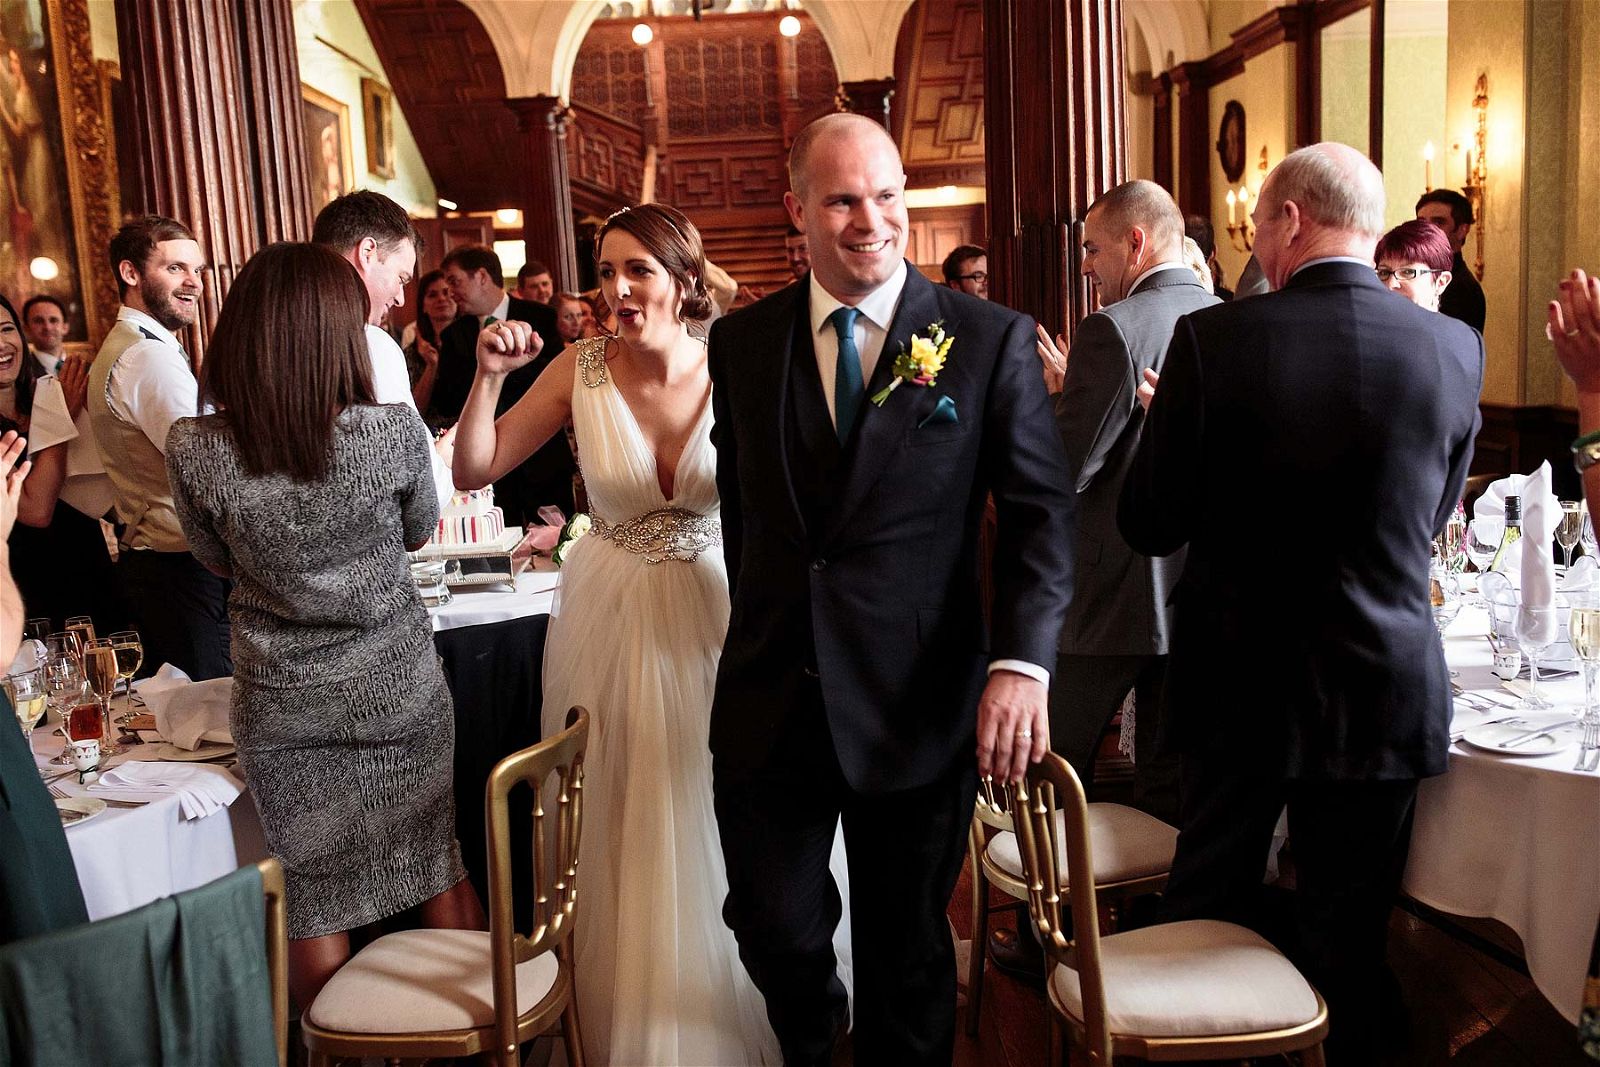 Stunning candid photos of entrance to wedding breakfast at Sandon Hall in Stafford by Stafford Documentary Wedding Photographer Stuart James